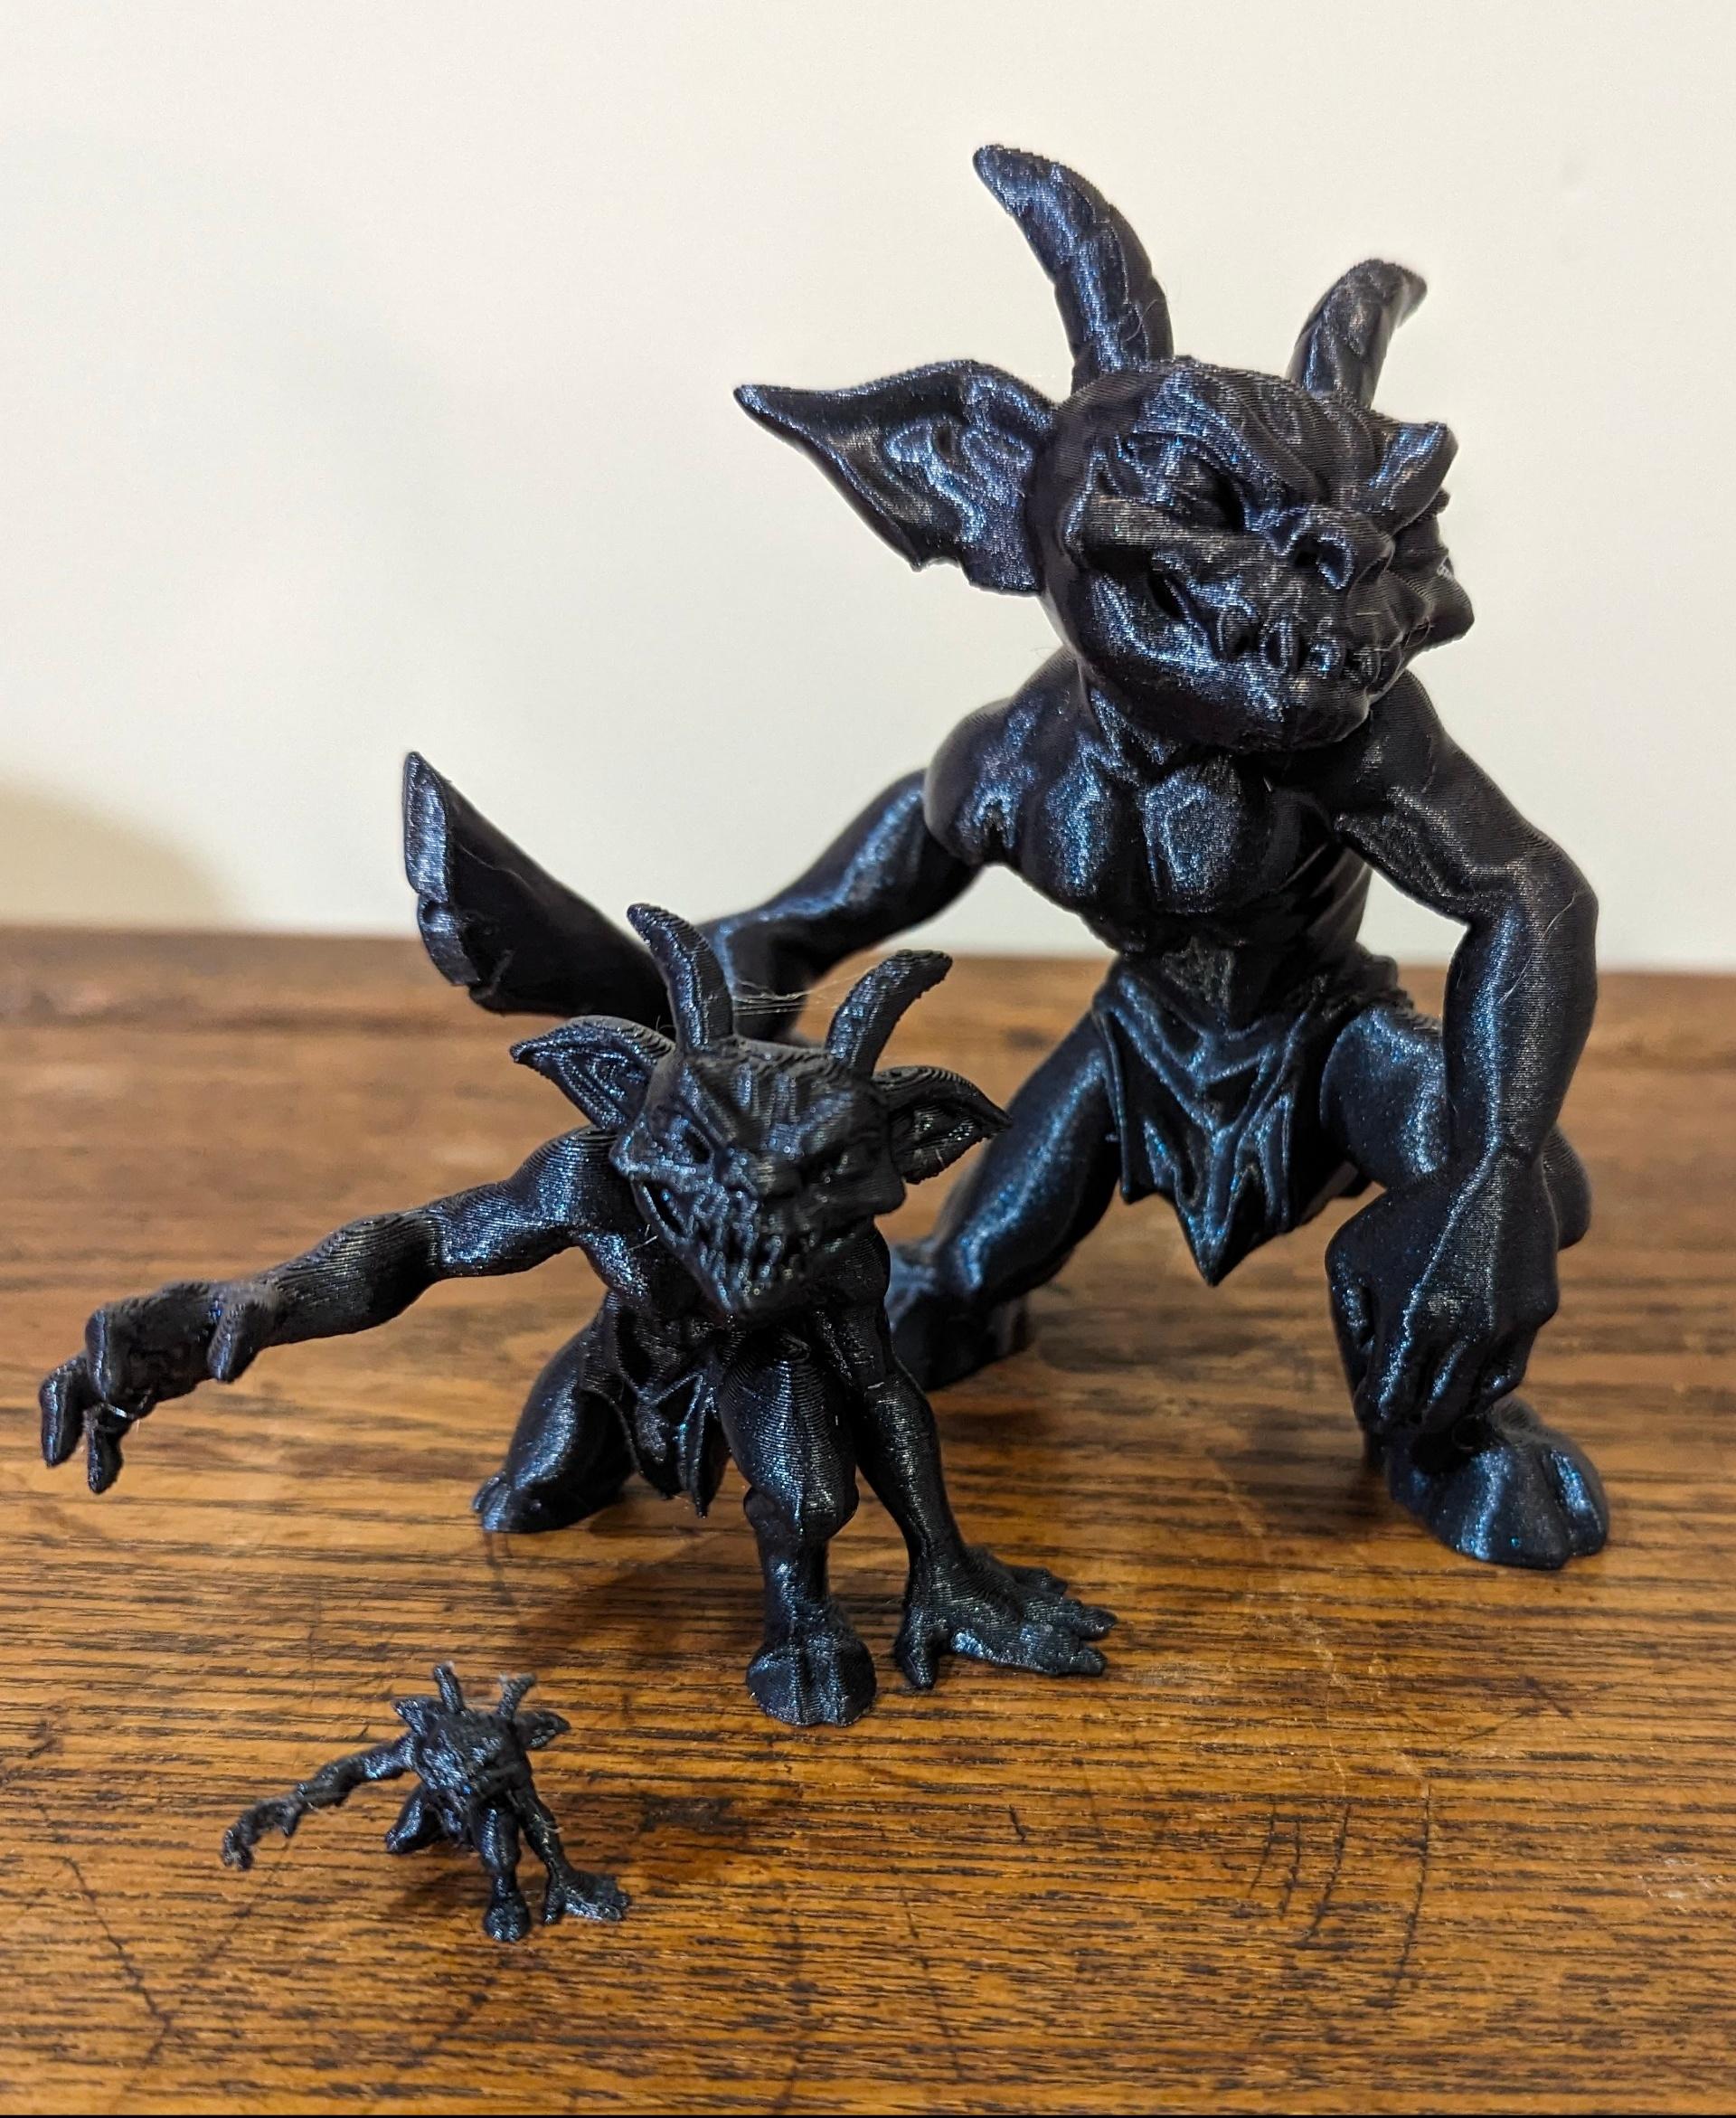 Imps  - Printed on the FlashForge ADM5 in Burnt Titanium
 
100%, 300%, and 500% - 3d model